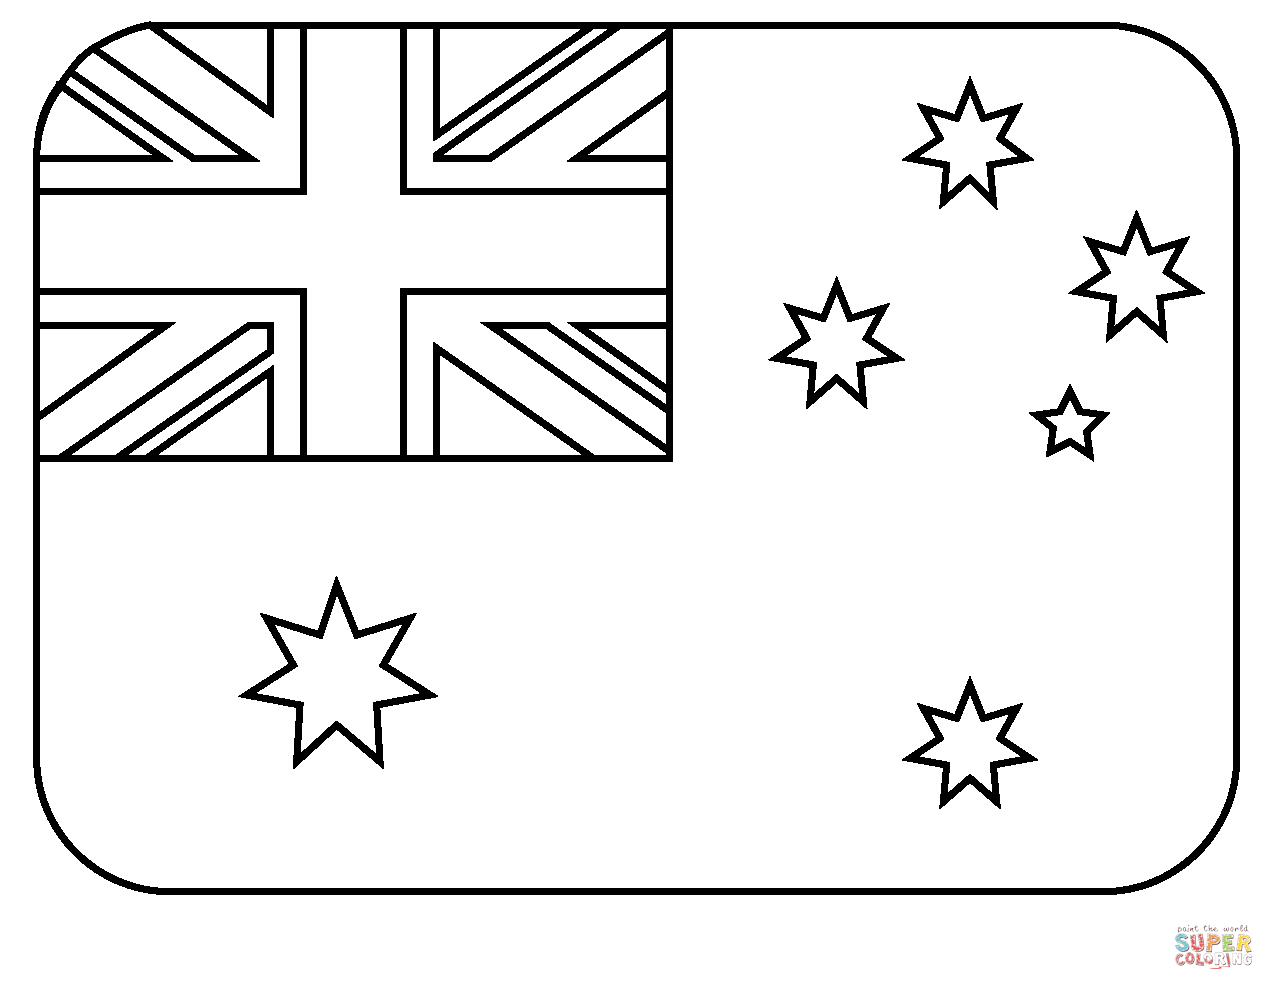 Flag of australia emoji coloring page free printable coloring pages